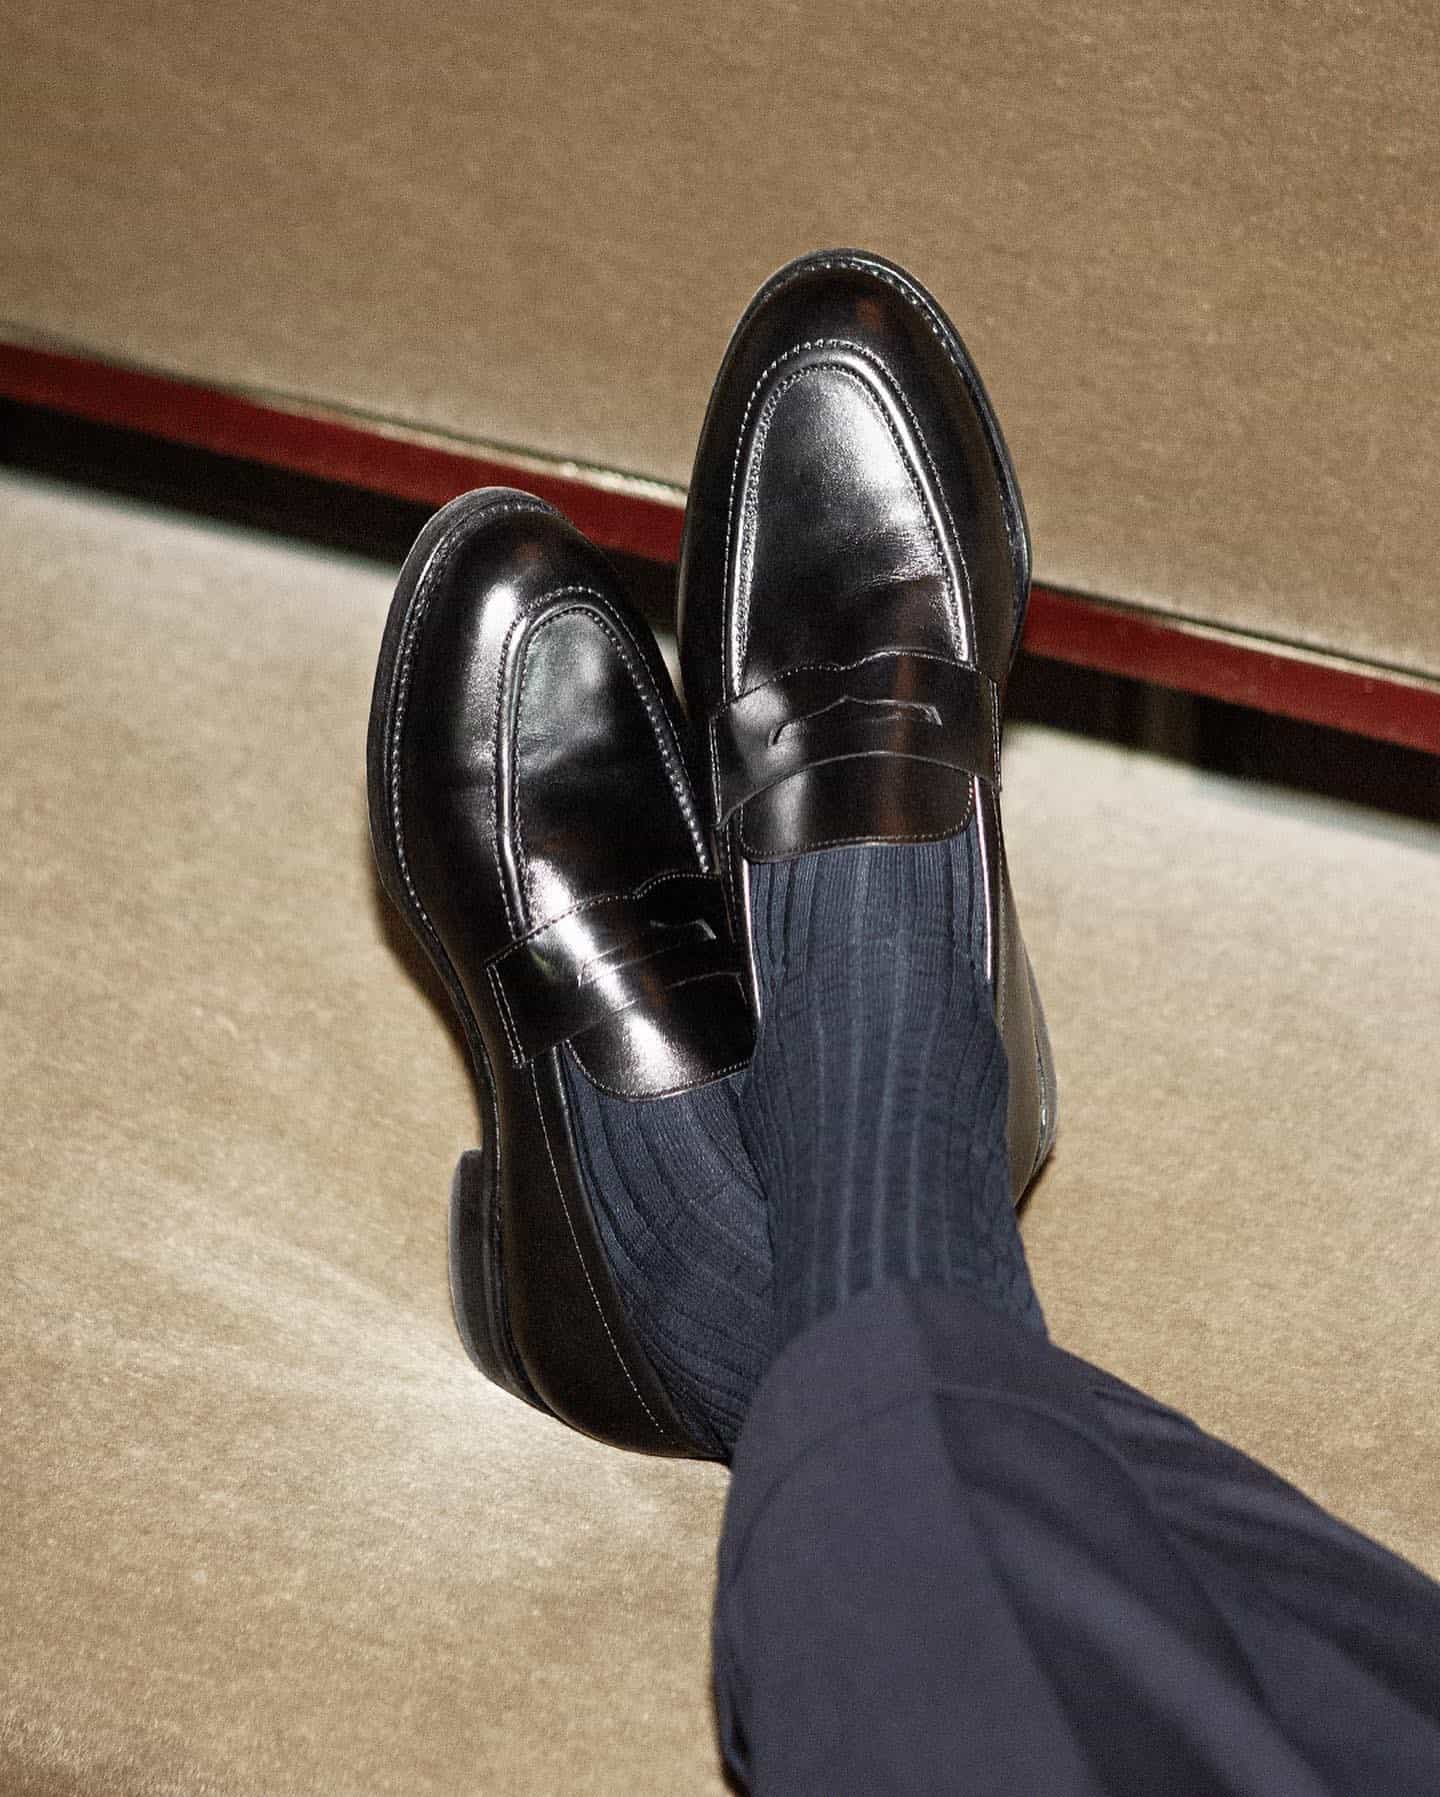 8 Business Professional Attire For Men Tips for 2023 | FashionBeans